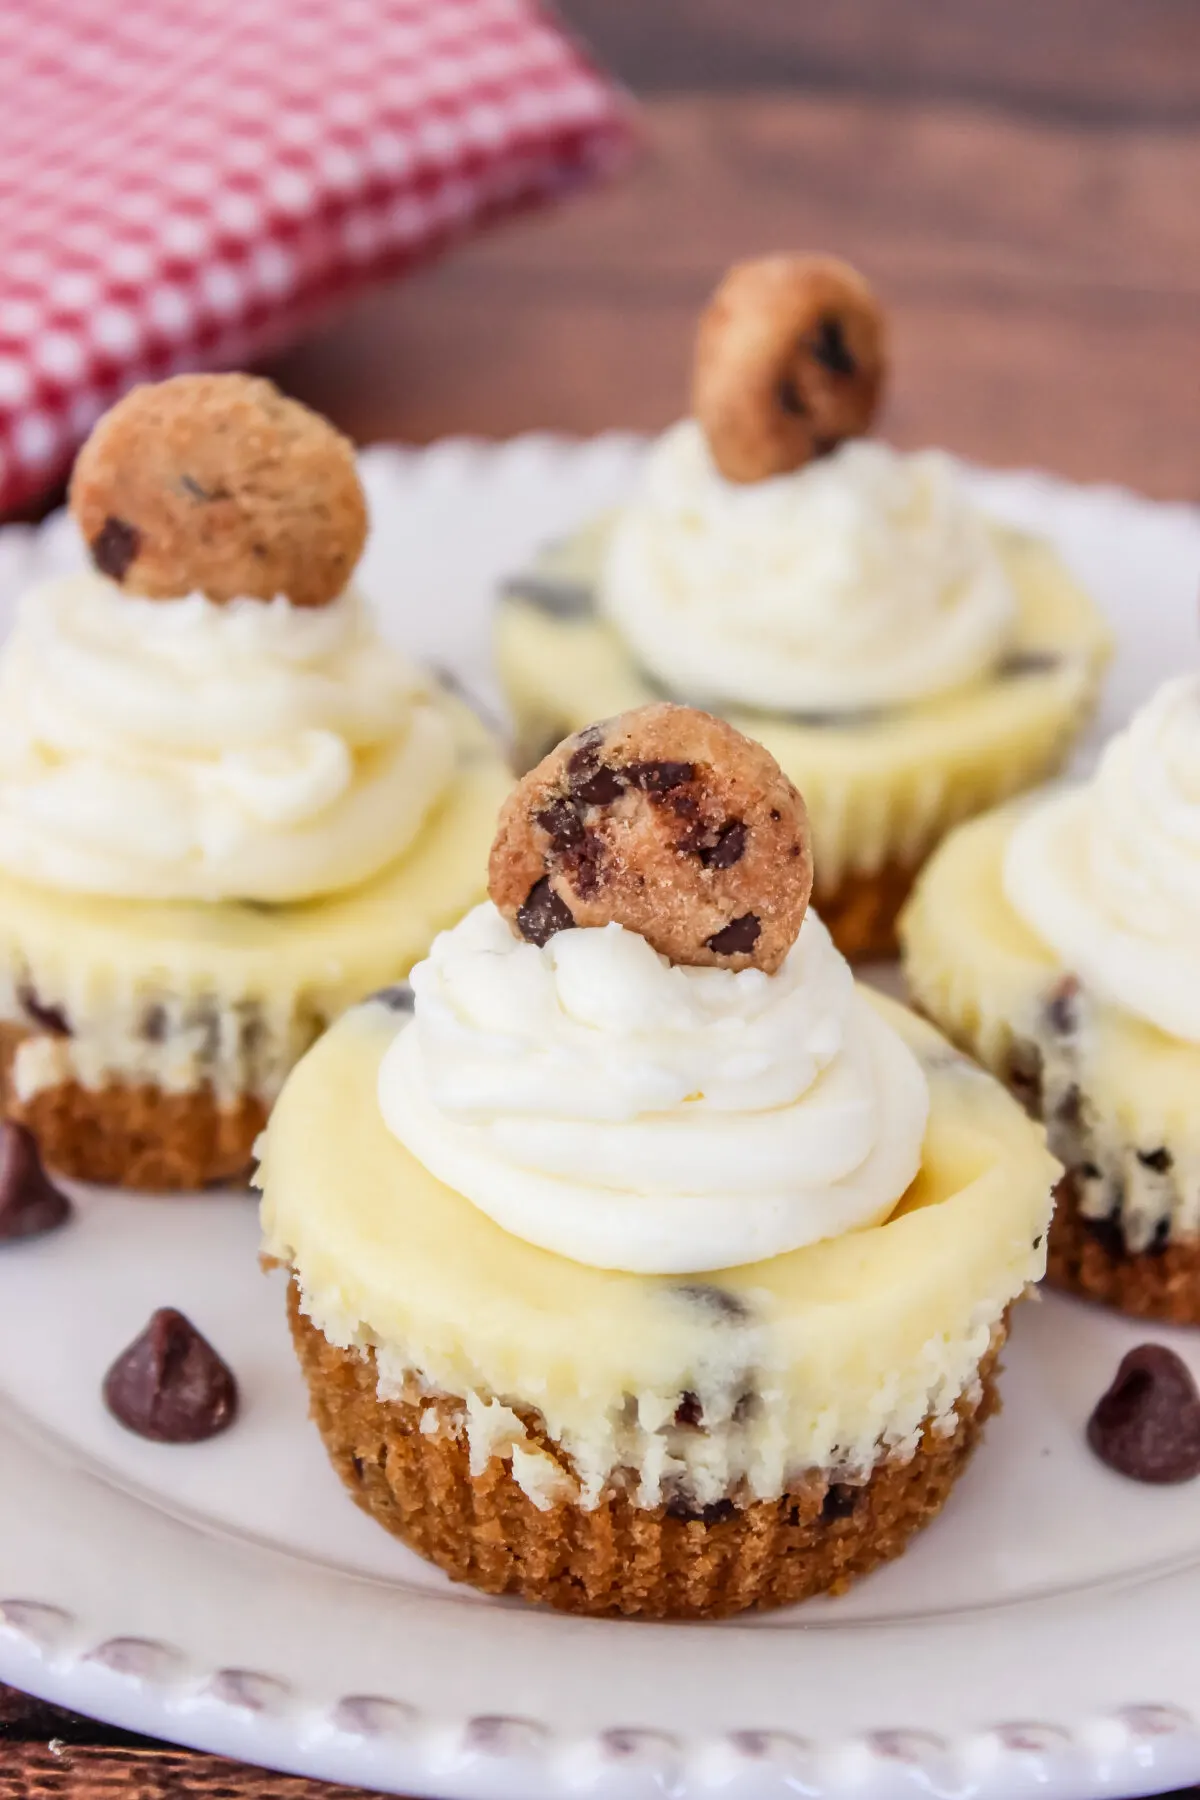 Chocolate Chip Cookie Mini Cheesecakes combine the flavours of chocolate chip cookies with a creamy cheesecake filling.